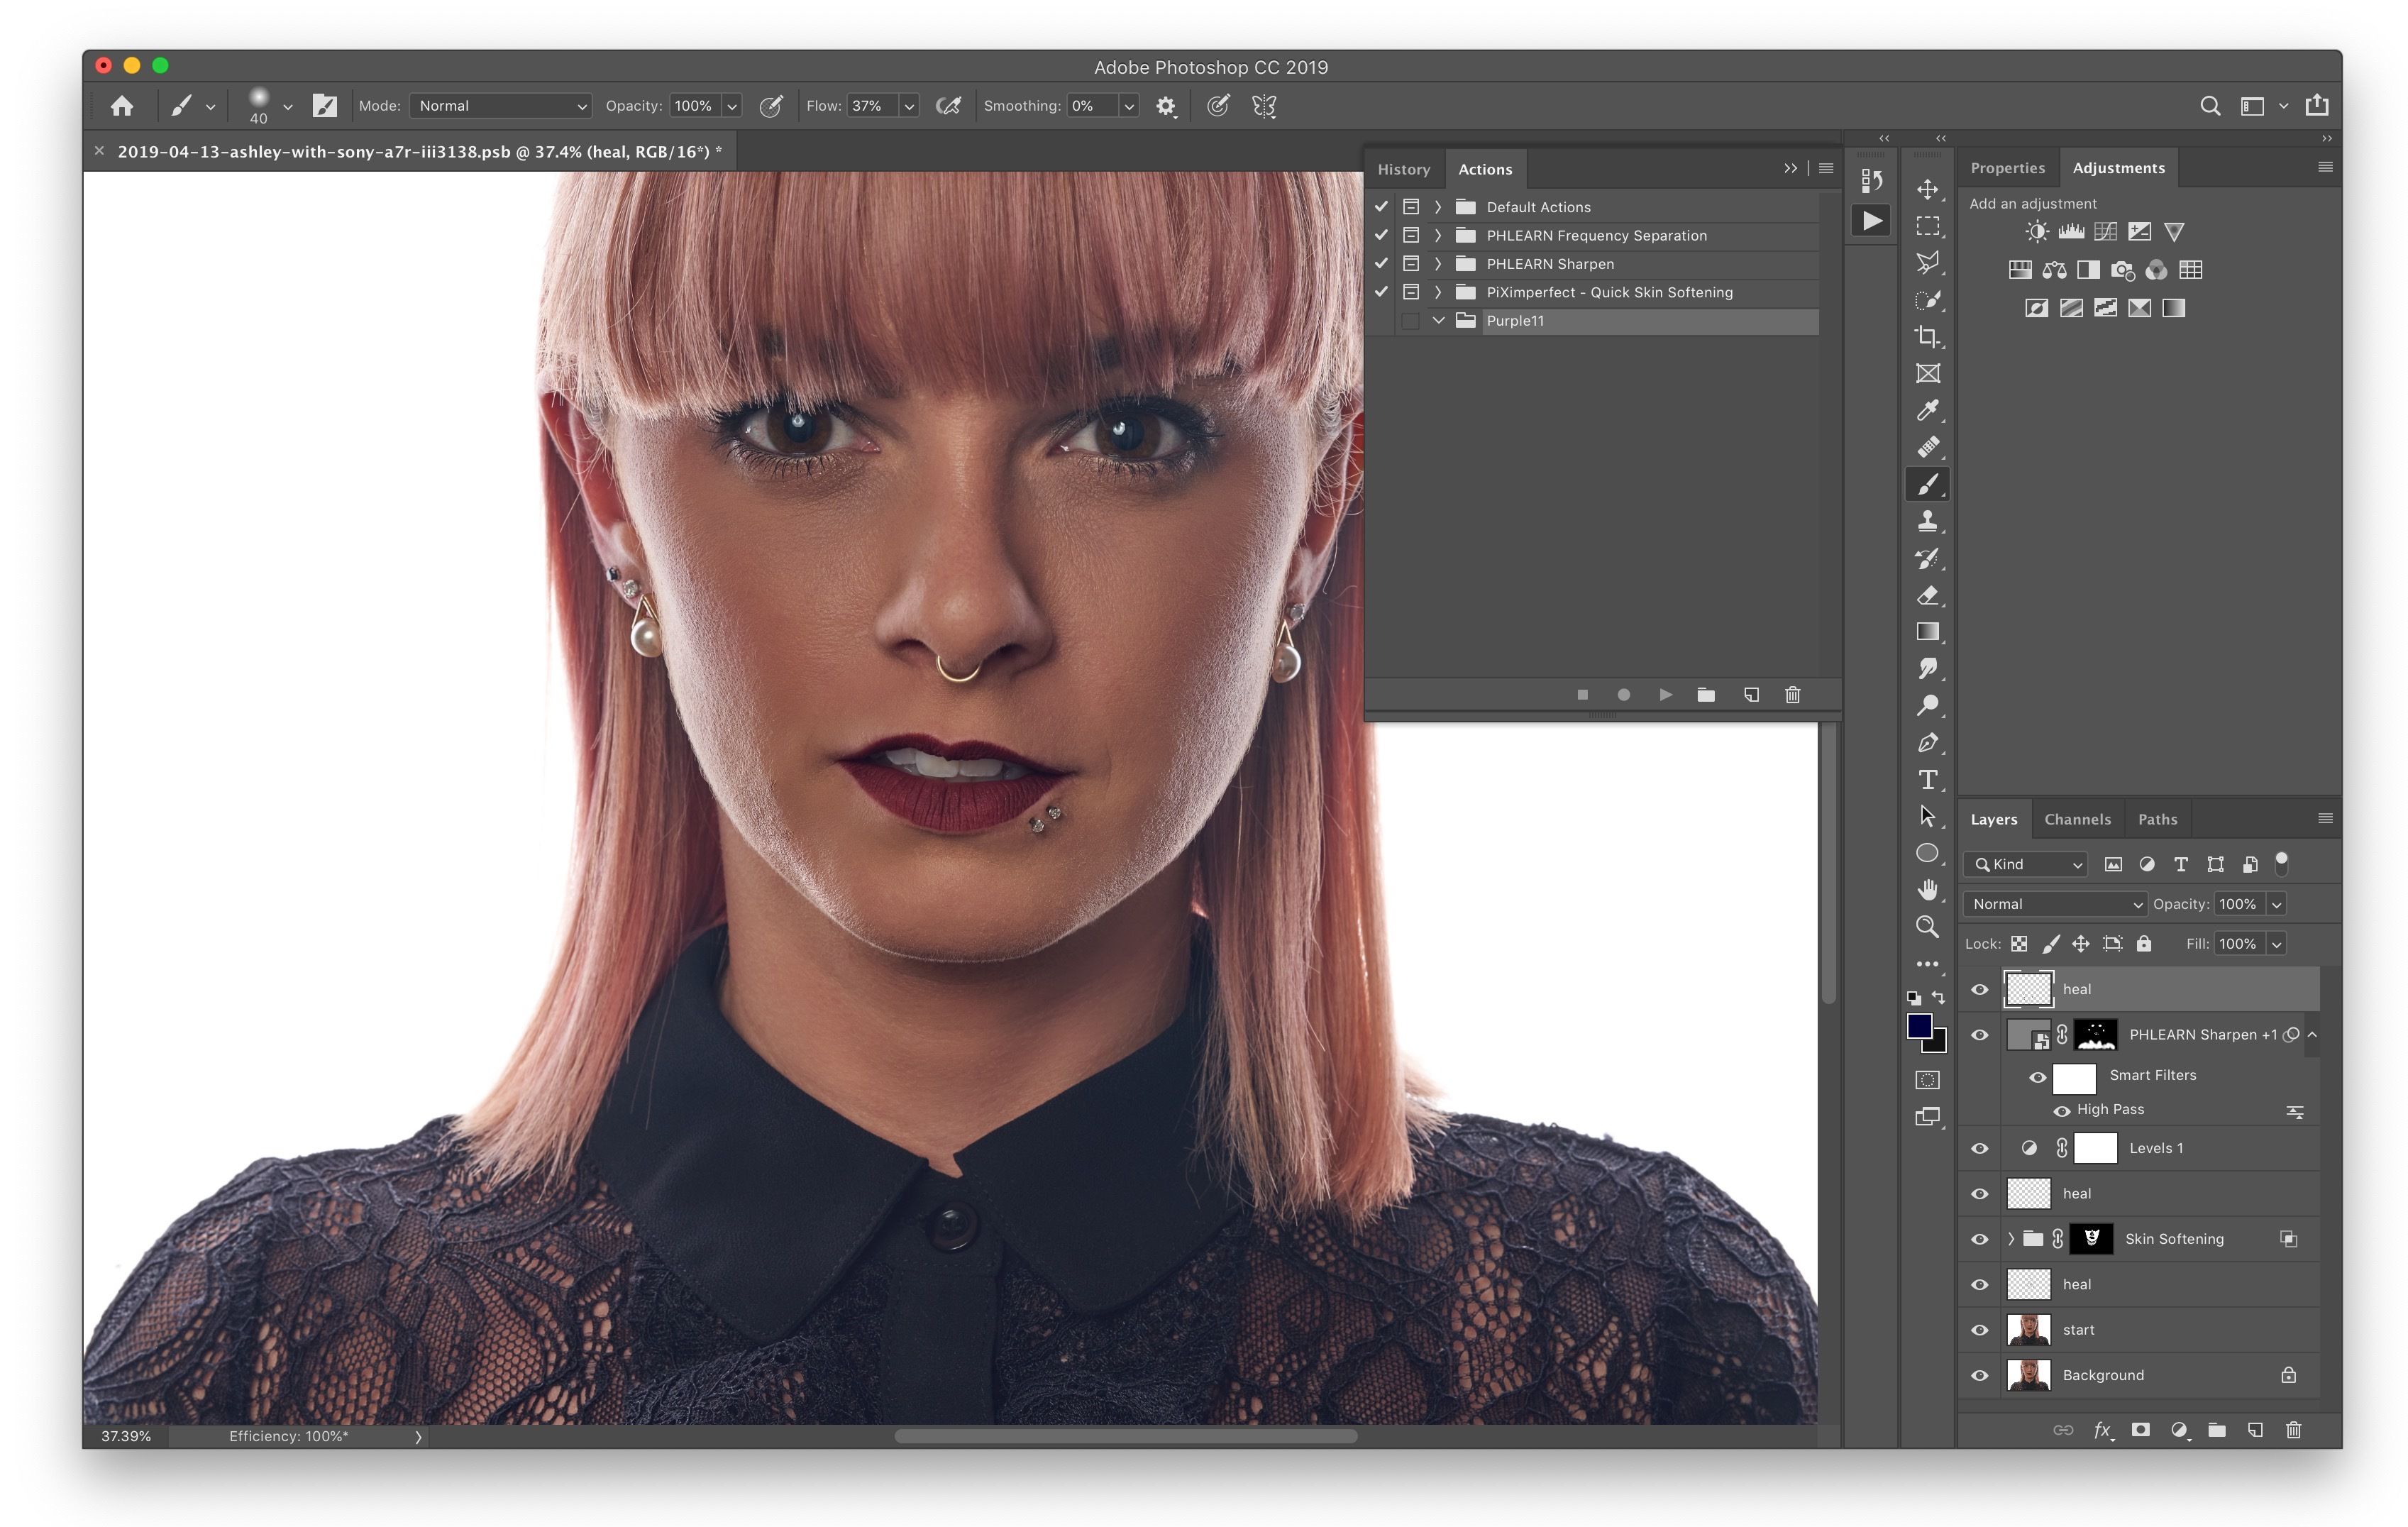 How to make a photo composite in Adobe Photoshop